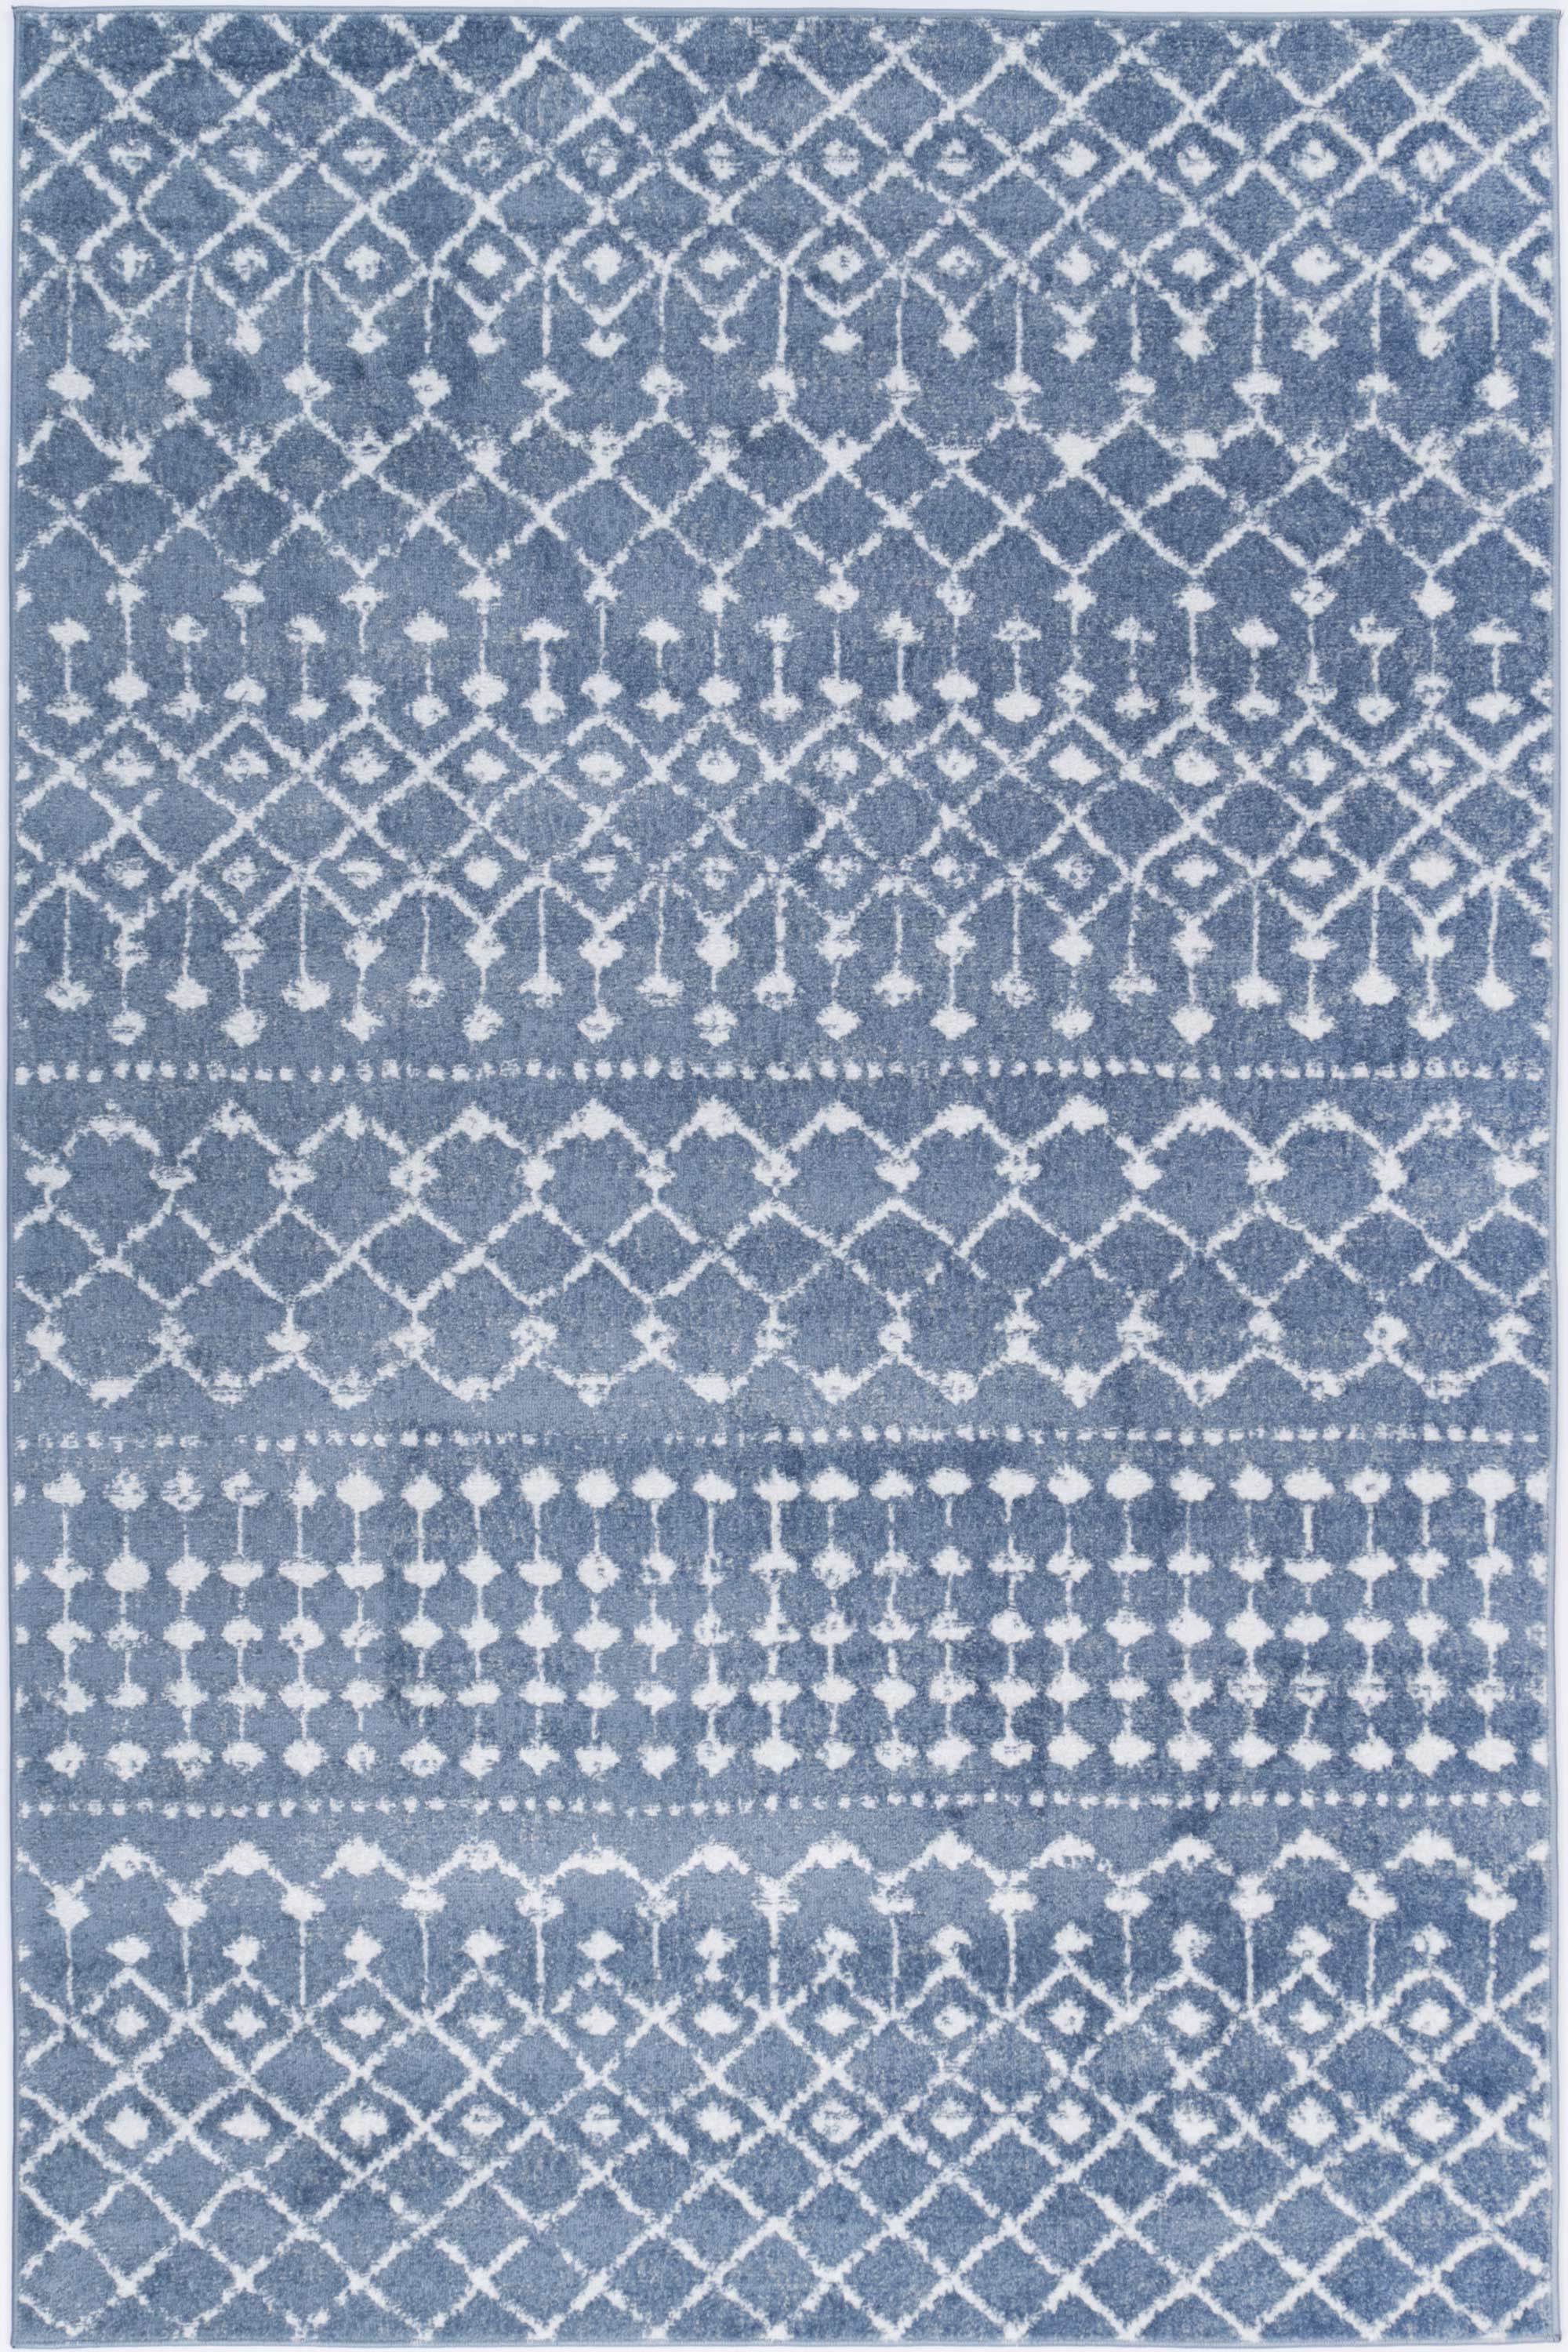 Bergen Repeats Blue and White Rug